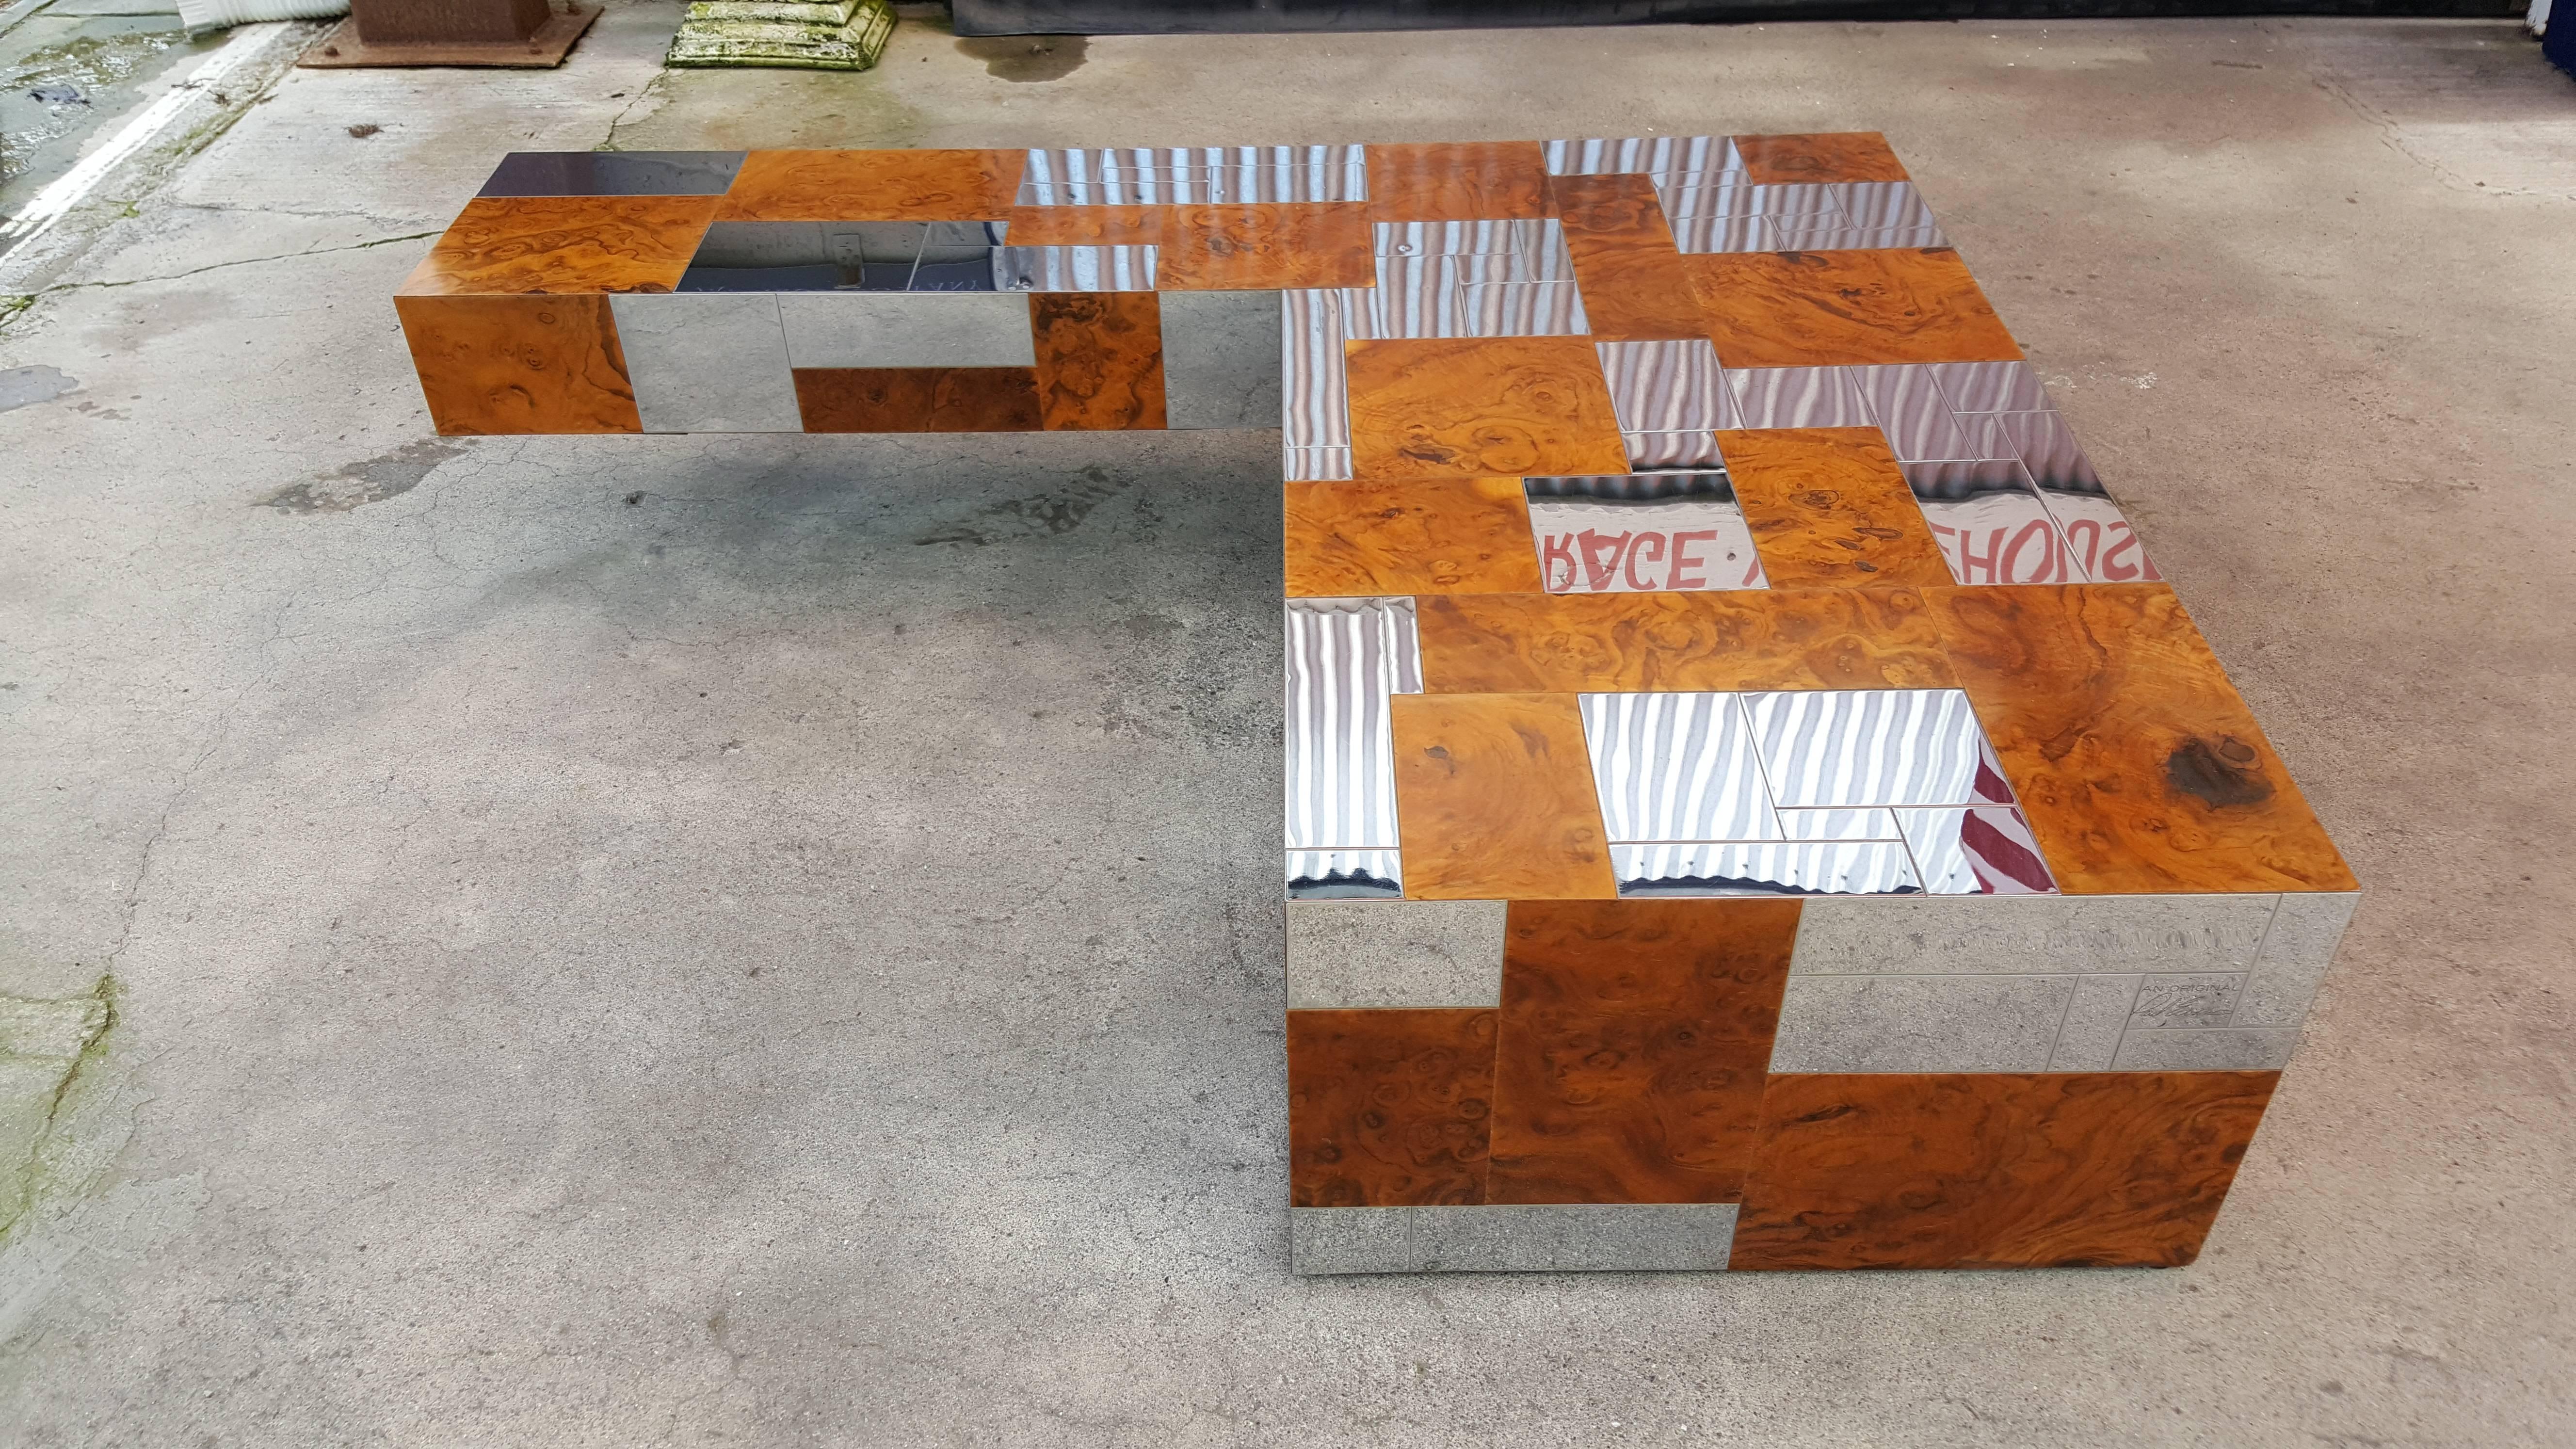 Exceptional cantilevered coffee table by Paul Evans Studio for Directional. PE 400 series, circa. 1975. Patchwork design with burl wood and chrome panels. Very good vintage condition with age appropriate wear.